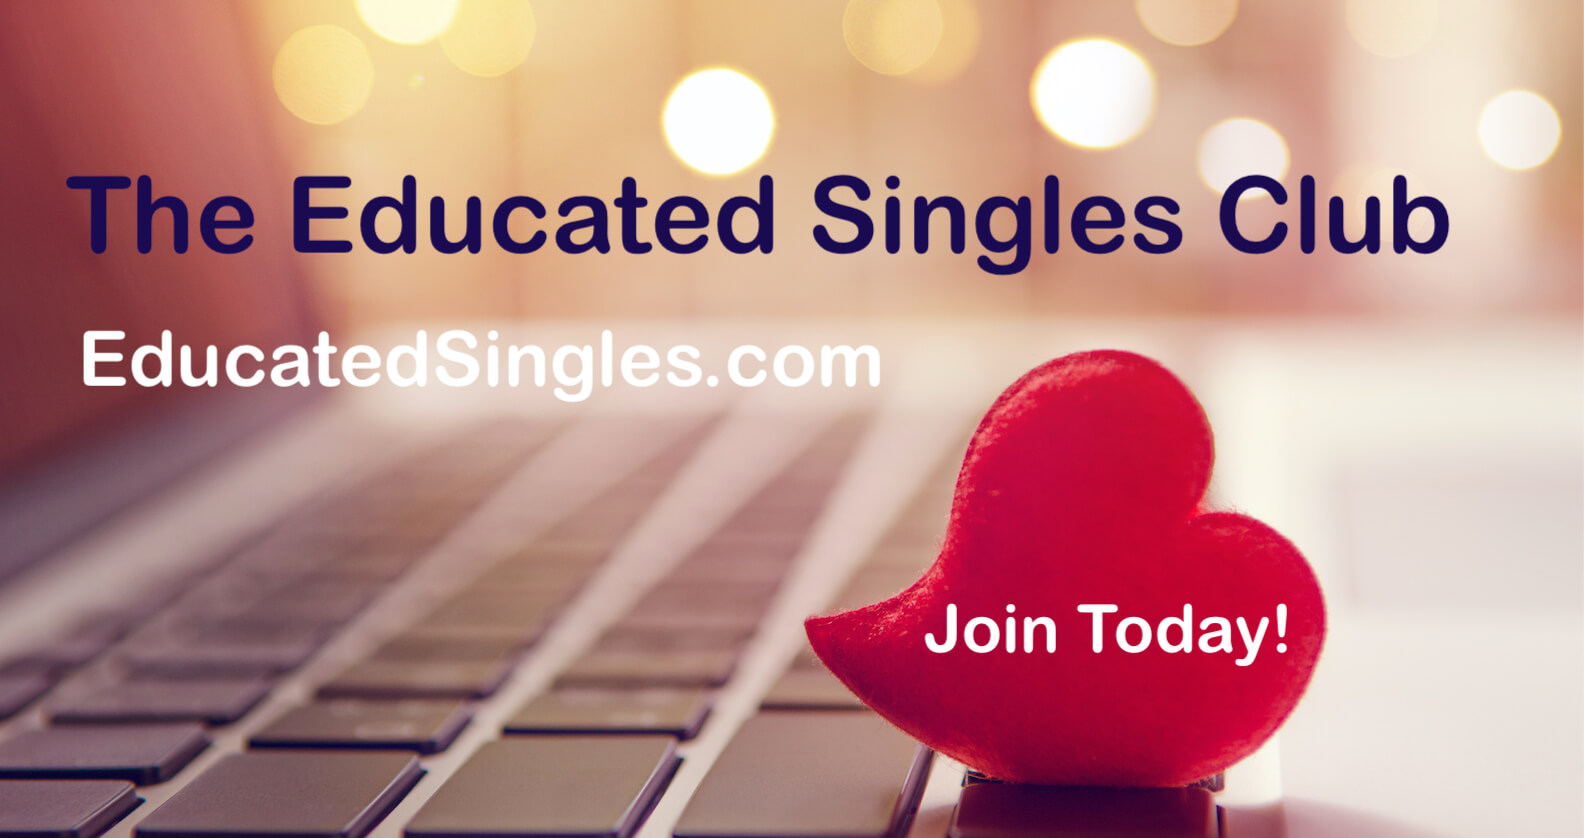 68% of the well-educated singles are struggling under covid19 